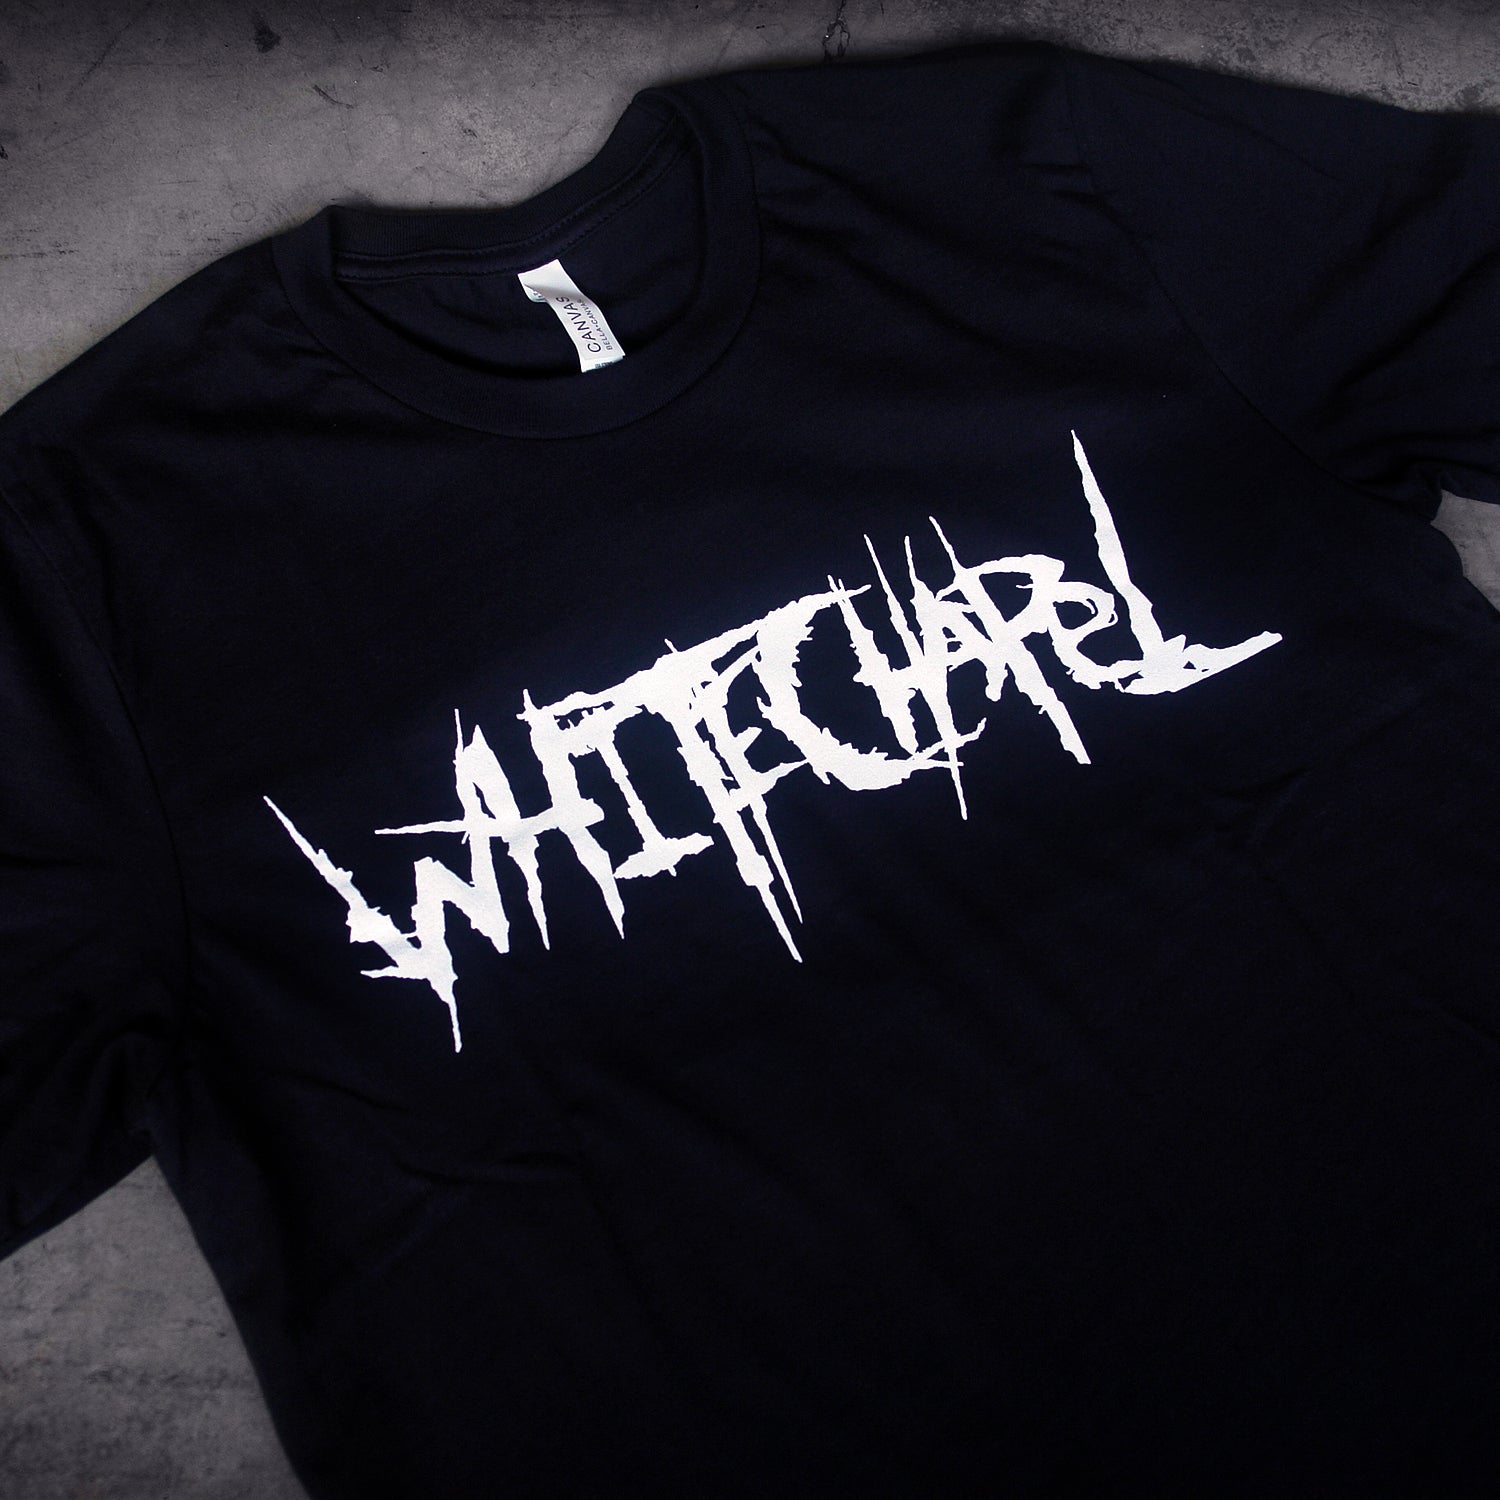 close up, angled image of a black tee shirt laid flat on a concrete floor. tee has center chest print in white that says whitechapel